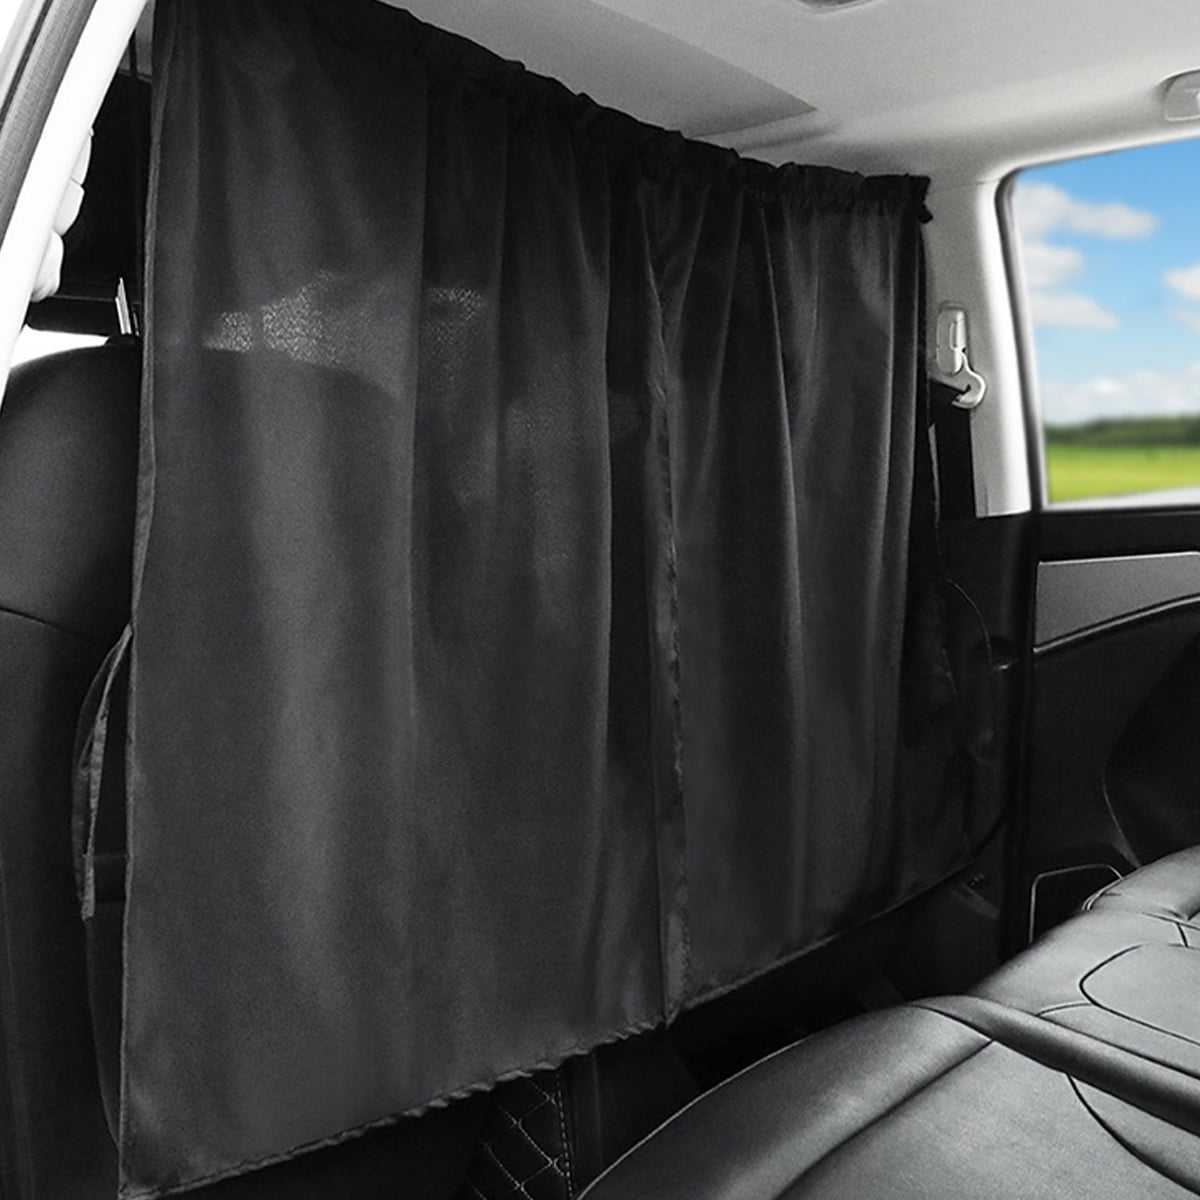 Car Divider Curtains Privacy Shades for Car Camping Car Window Shades Partition for SUV Cars Trucks 